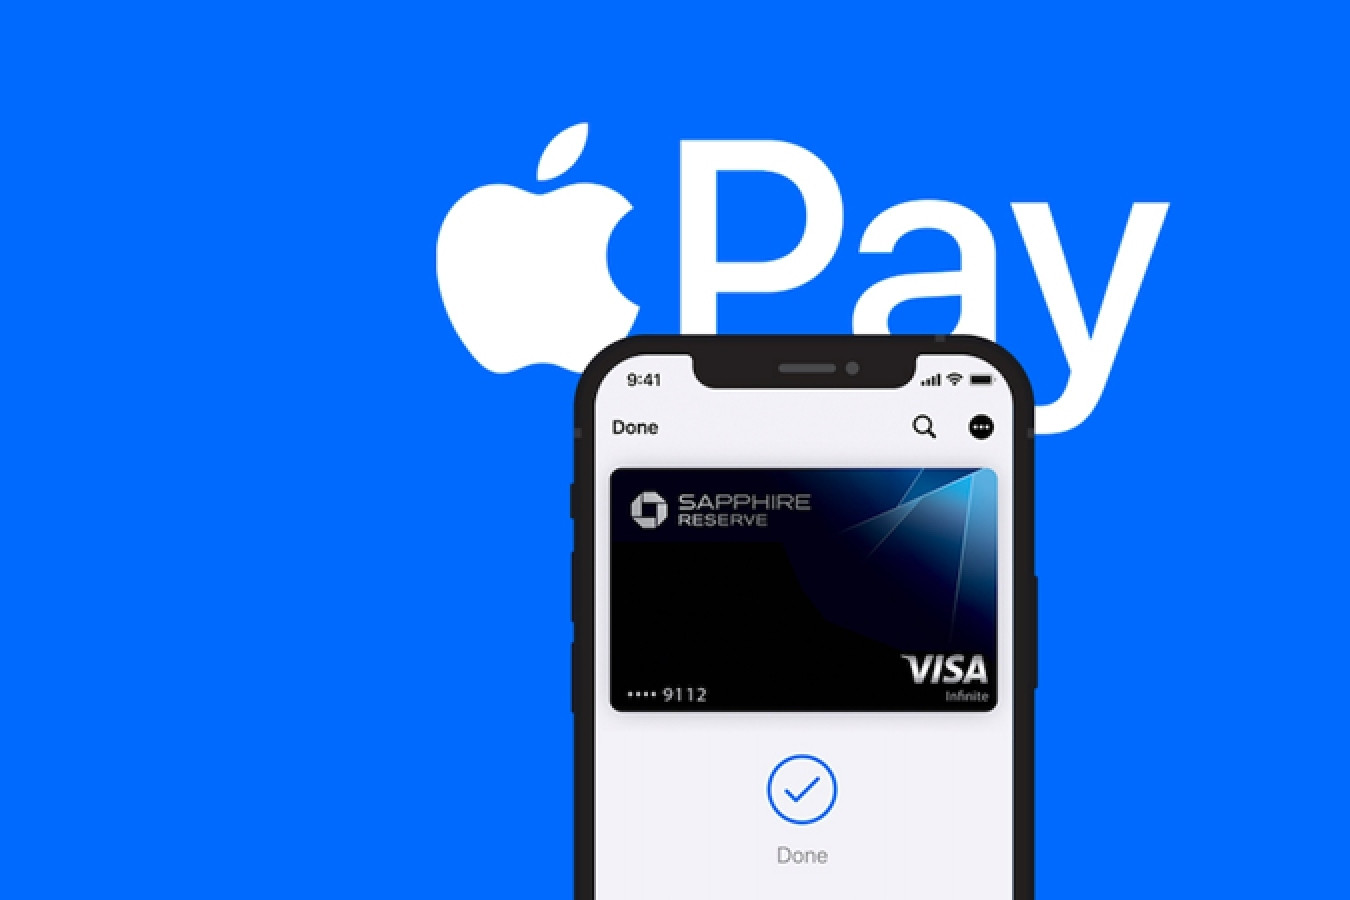 Apple Pay officially launched in Vietnam